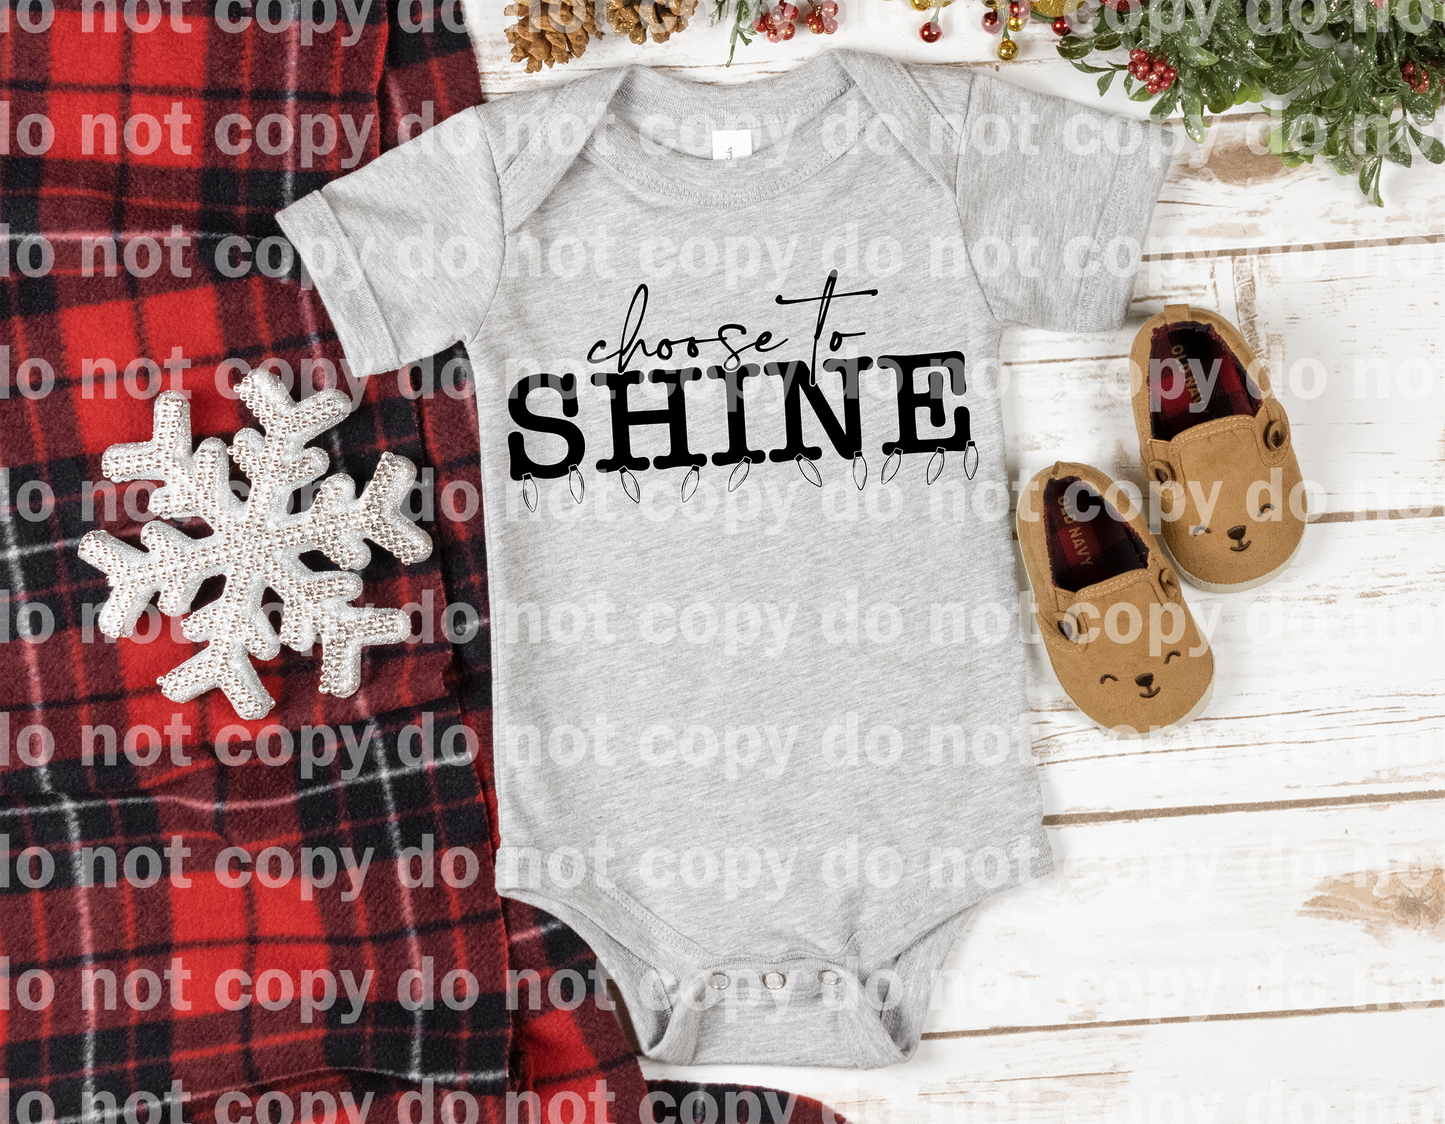 Choose To Shine Full Color/One Color Dream Print or Sublimation Print